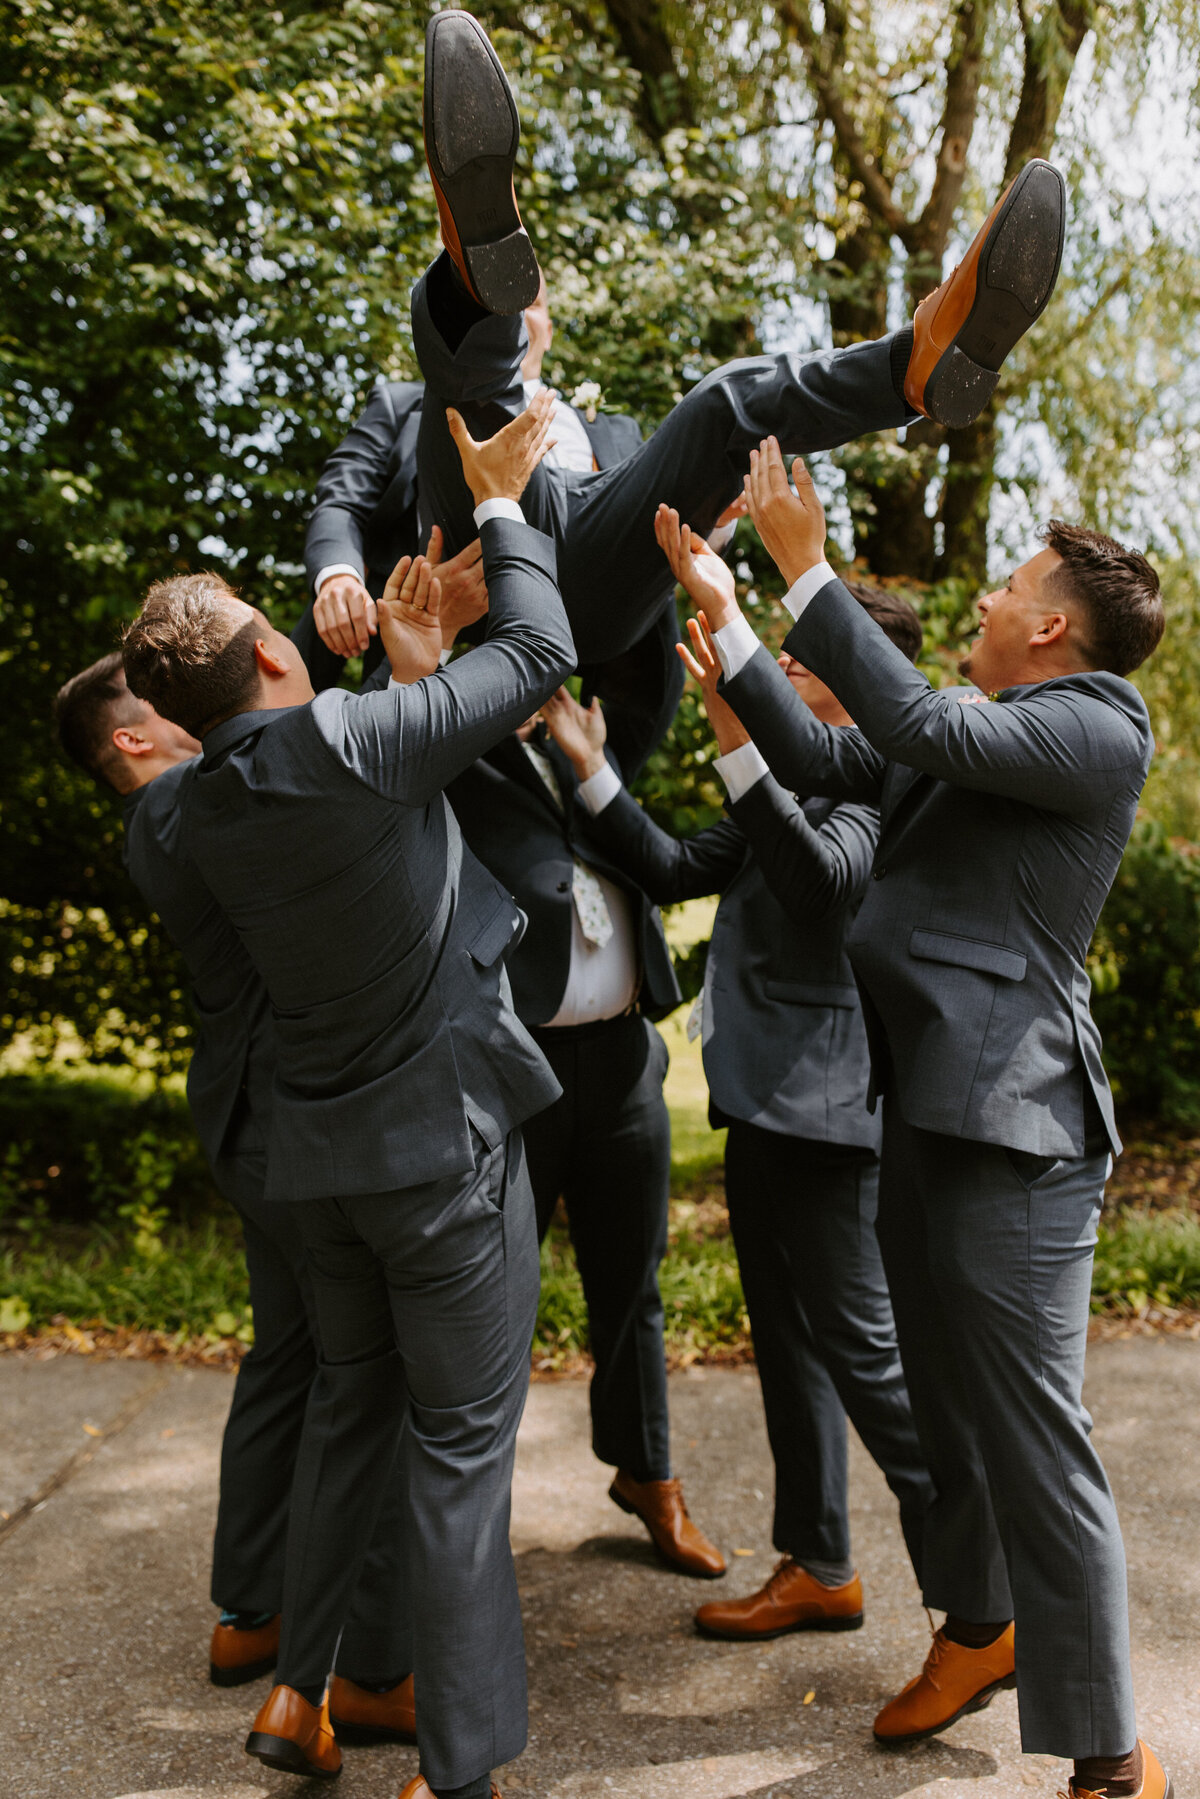 groomsmen holding up the groom in the air